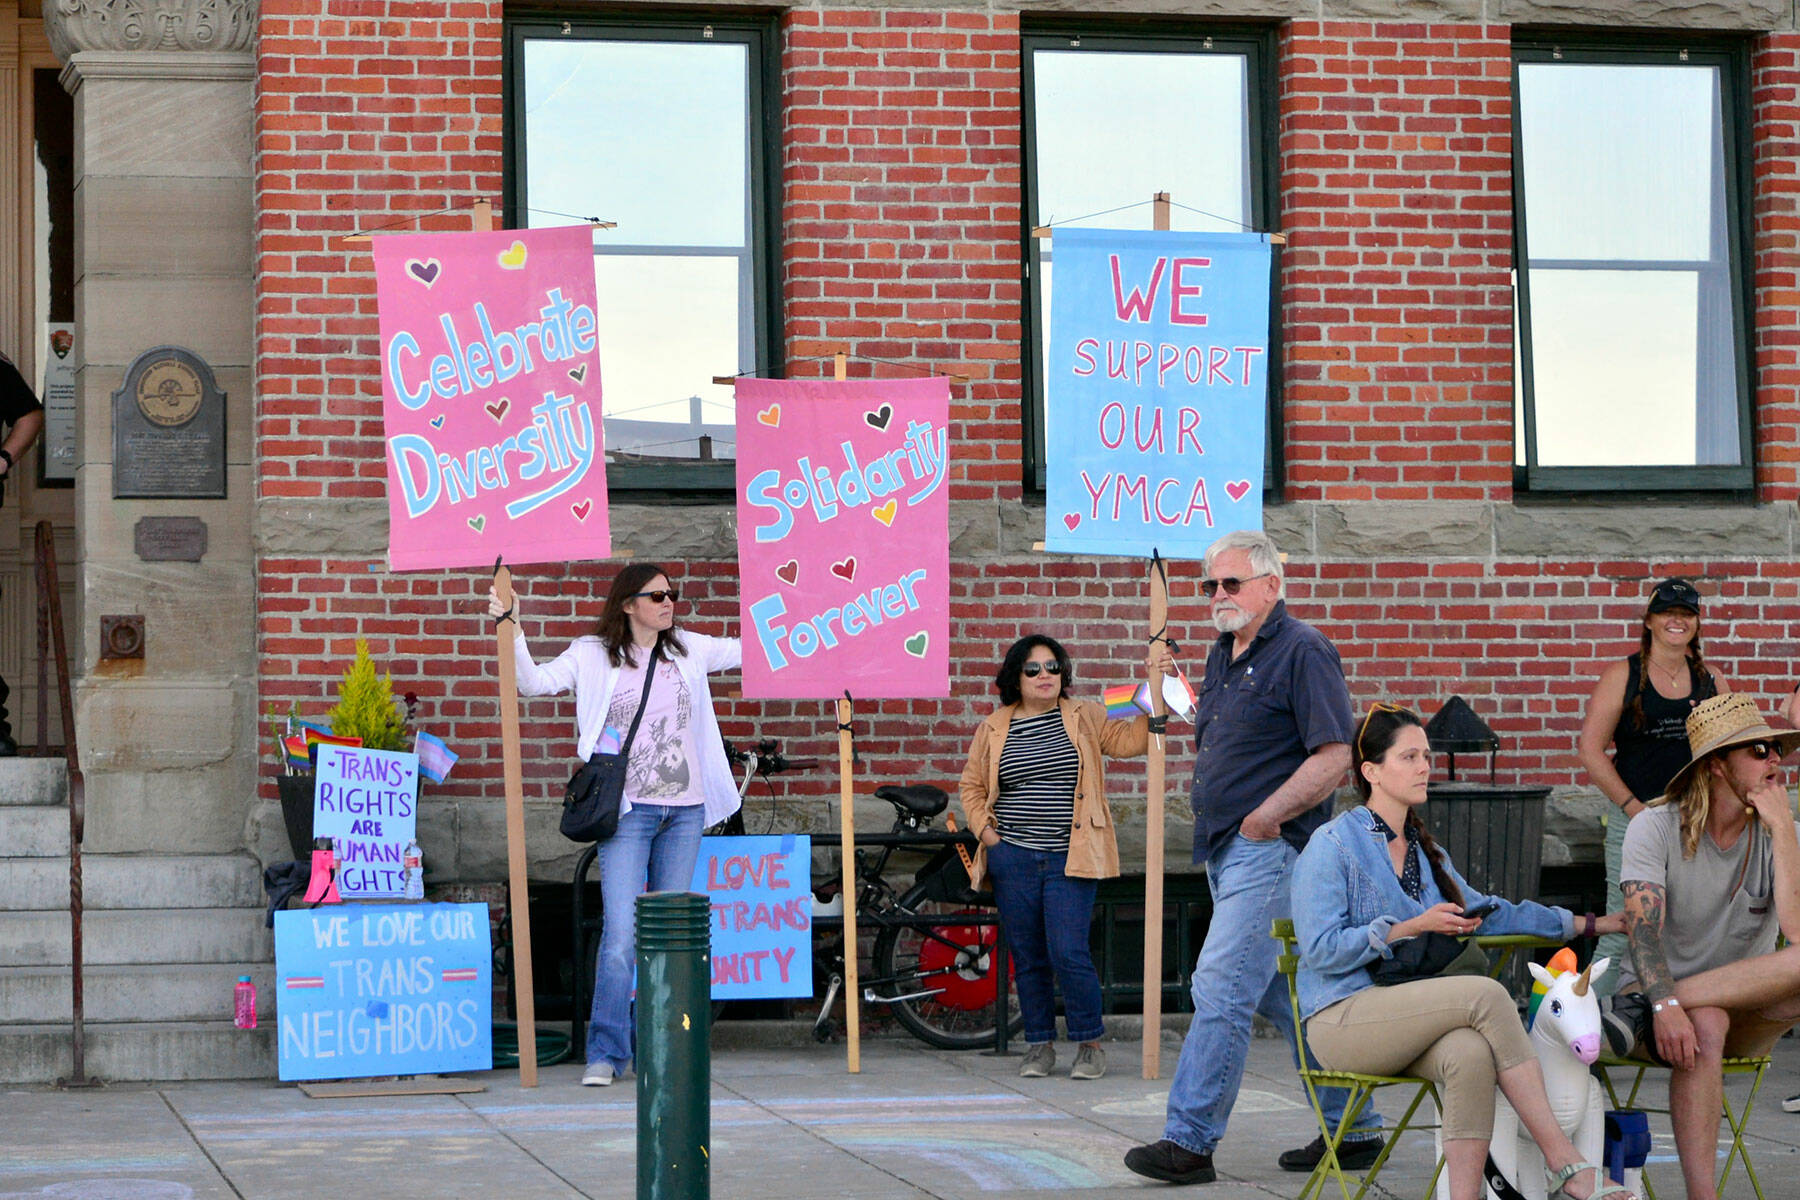 Supporters of transgender rights gathered in front of Port Townsend City Hall on Monday during a city council meeting when a proclamation was read stating the city is a welcoming place for transgender people. An 80-year-old woman’s ban from the local swimming pool following a confrontation with a transgender woman in the locker has received national attention, and people on both sides of transgender issues traveled to Port Townsend to show their support for their respective sides. (Peter Segall / Peninsula Daily News)